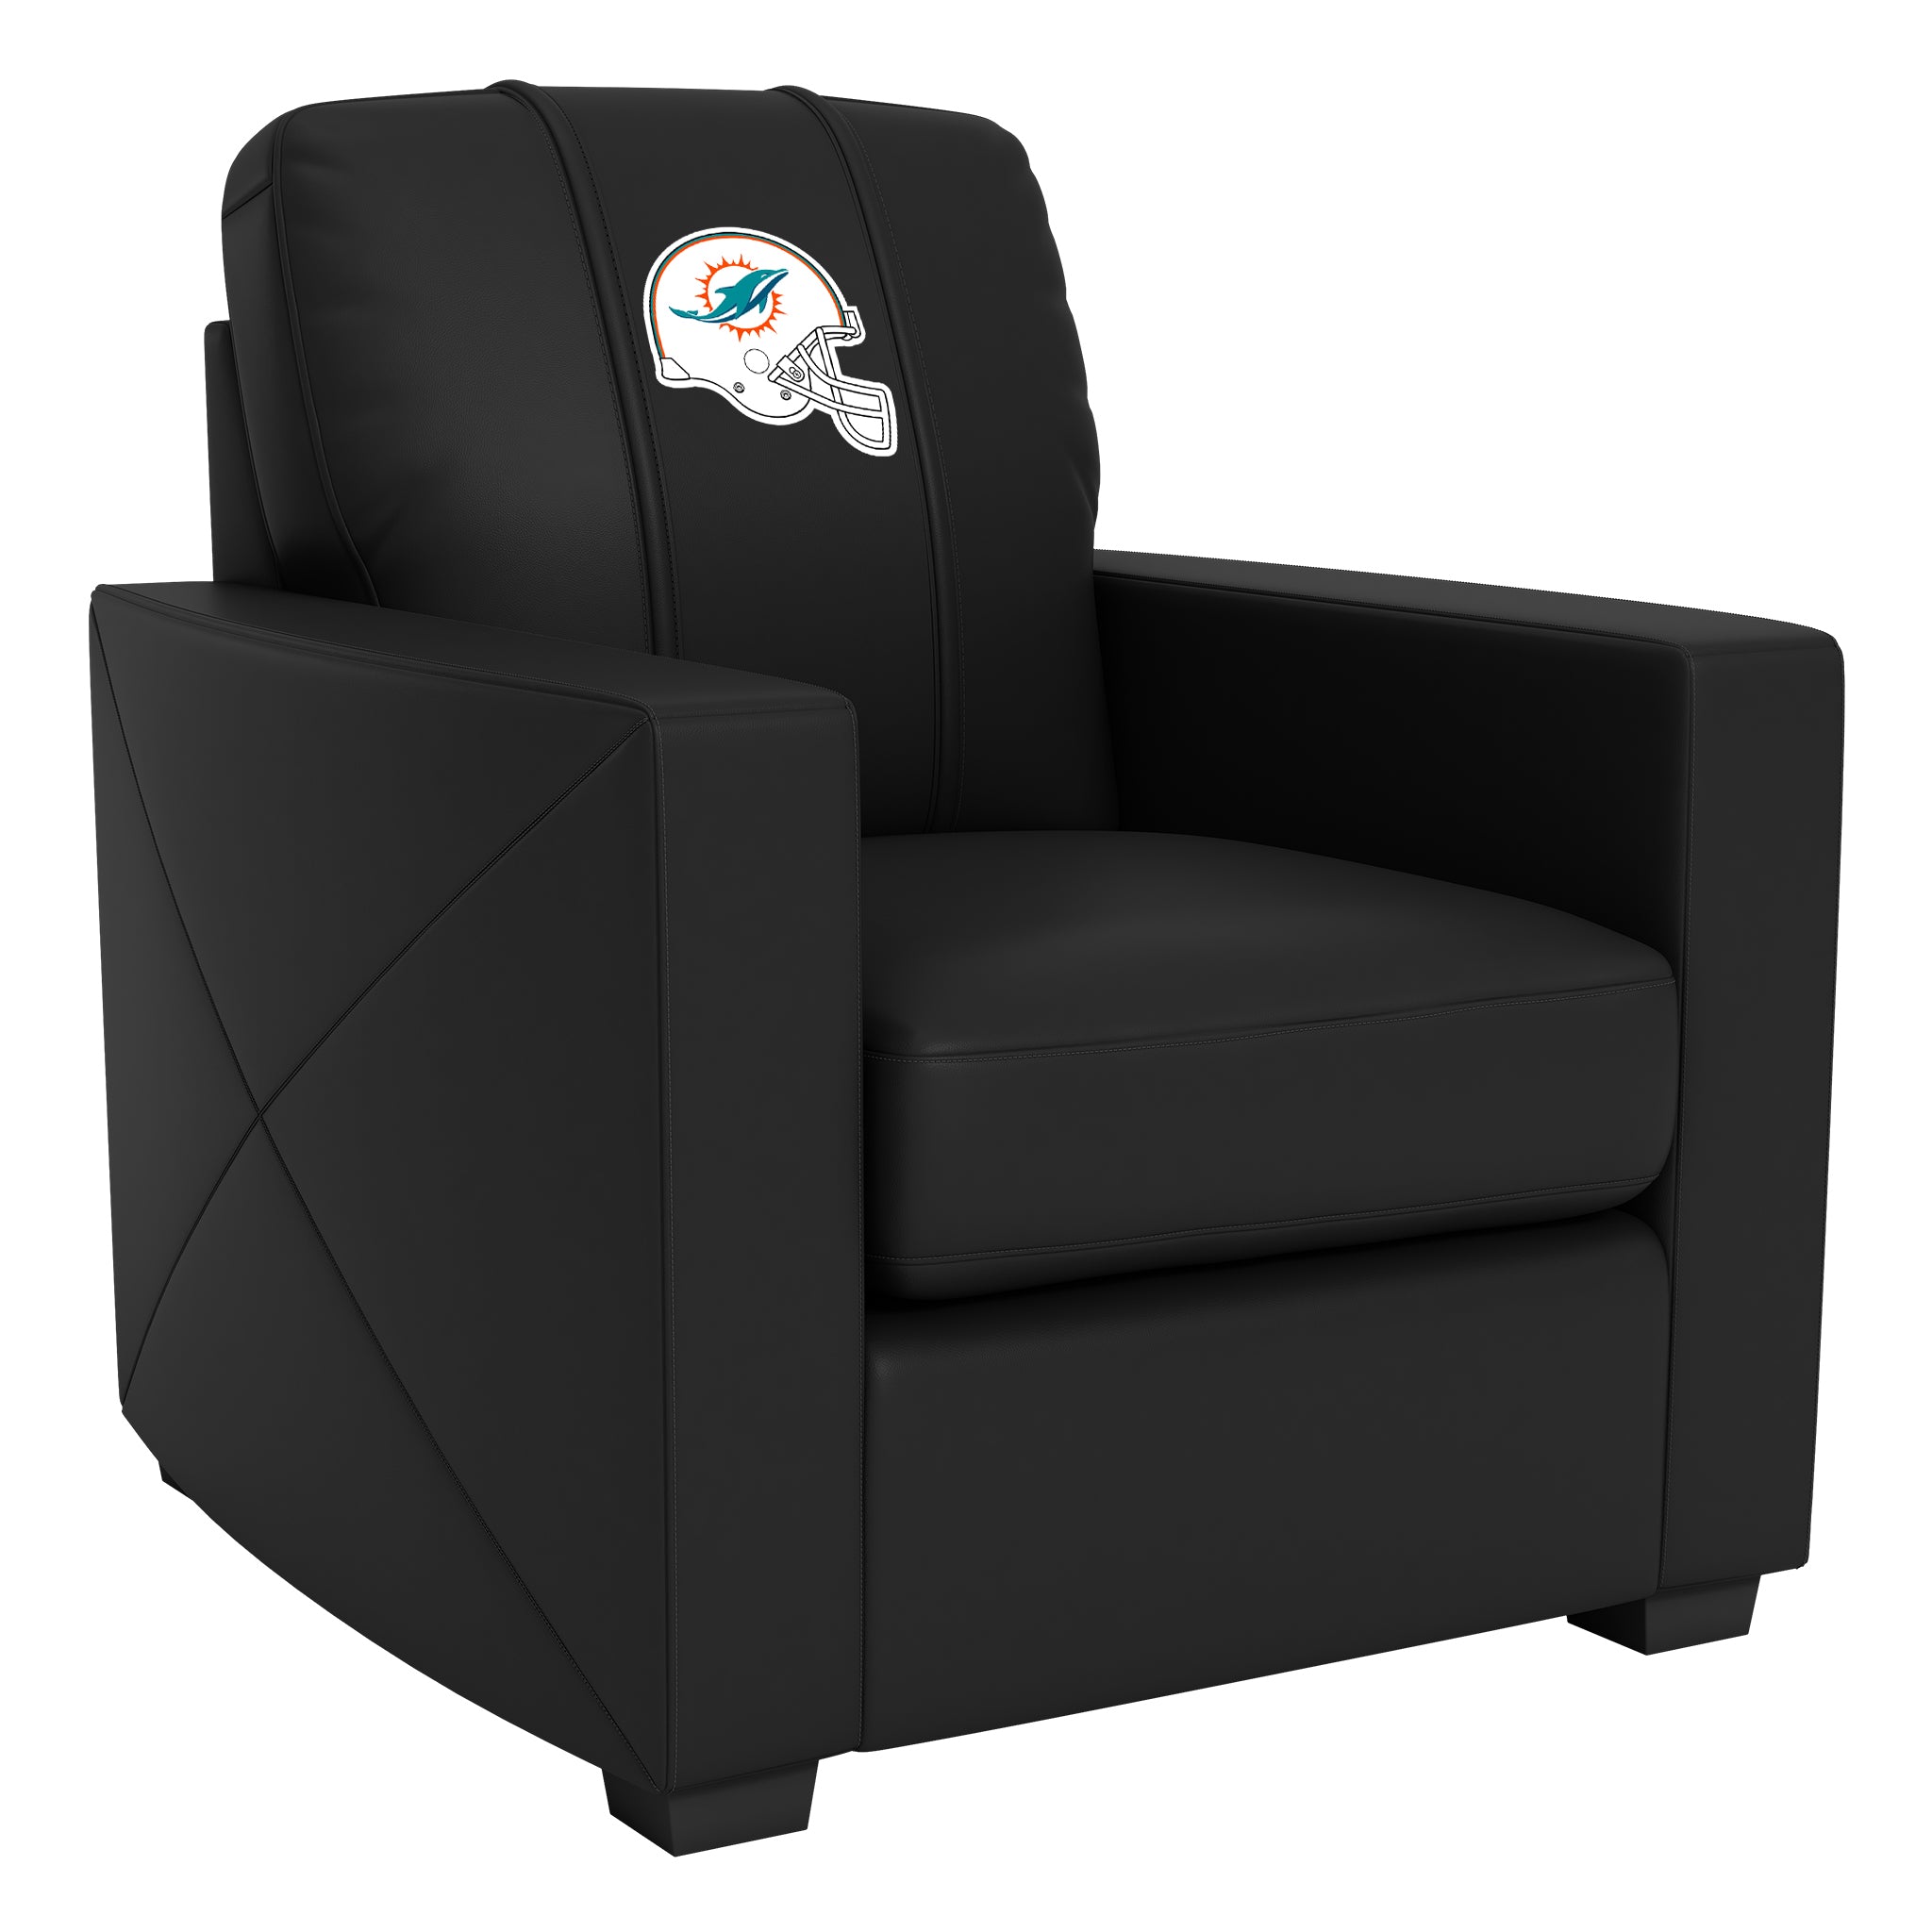 Silver Club Chair with  Miami Dolphins Helmet Logo